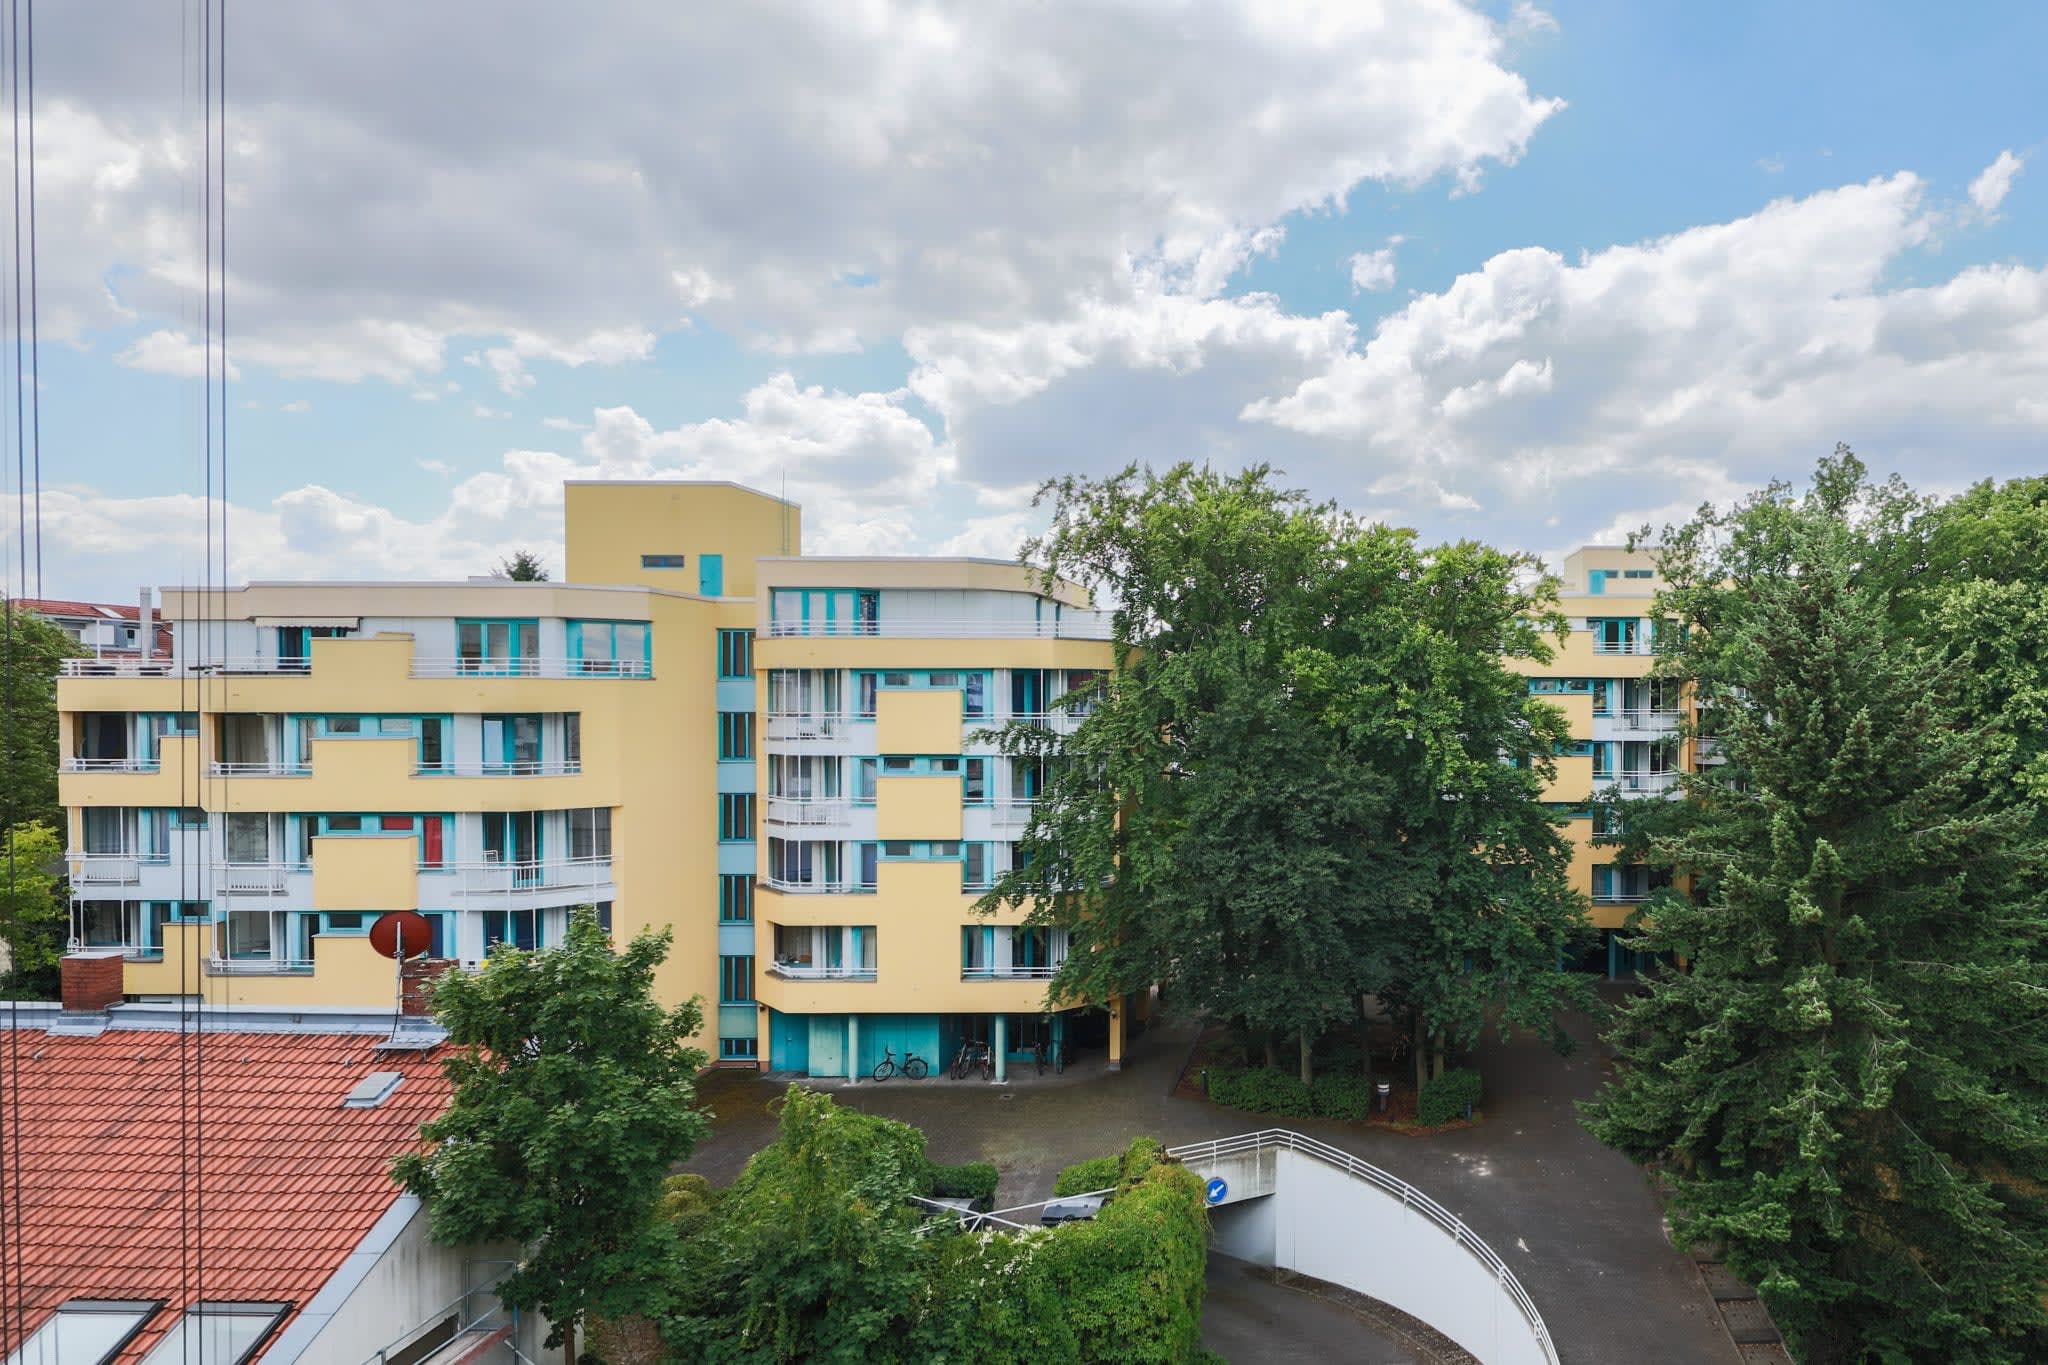 Student Accommodation Housing In Germany Nido Student